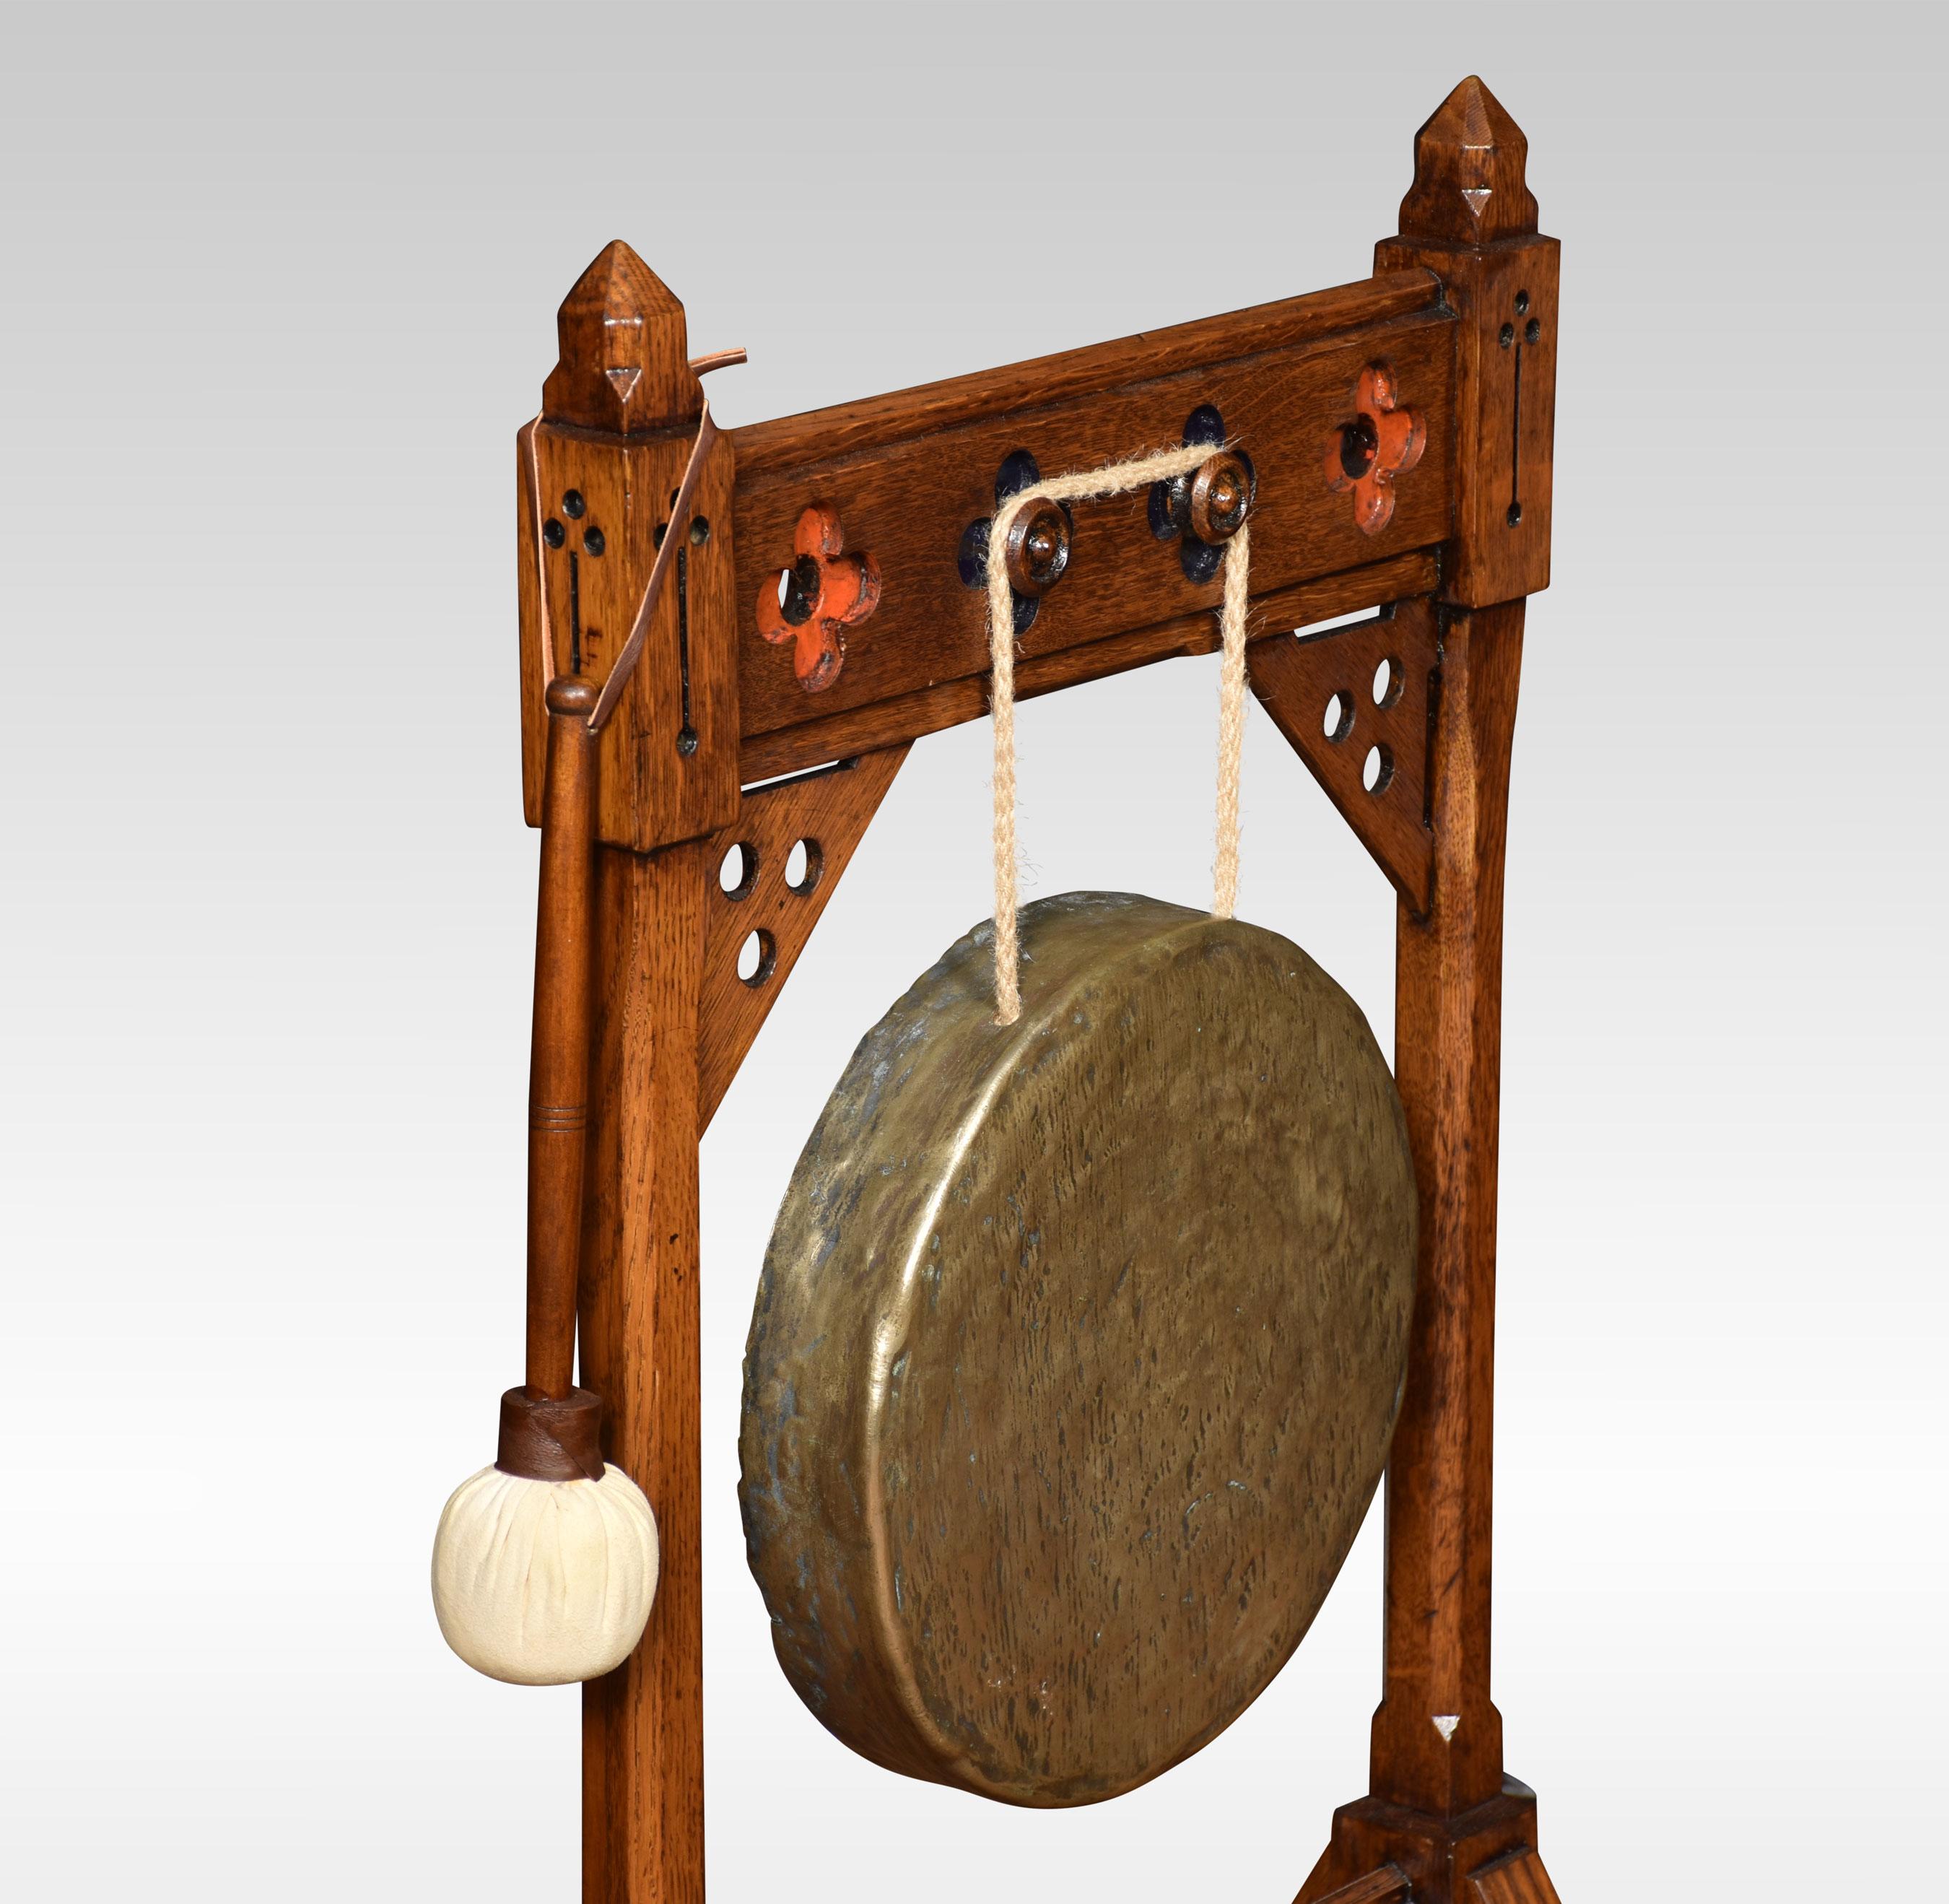 Gothic revival dinner gong, in the style of Bruce Talbert. With an oak frame, brass gong, together with beater.
Dimensions
Height 39 Inches
Width 21 Inches
Depth 15 Inches.